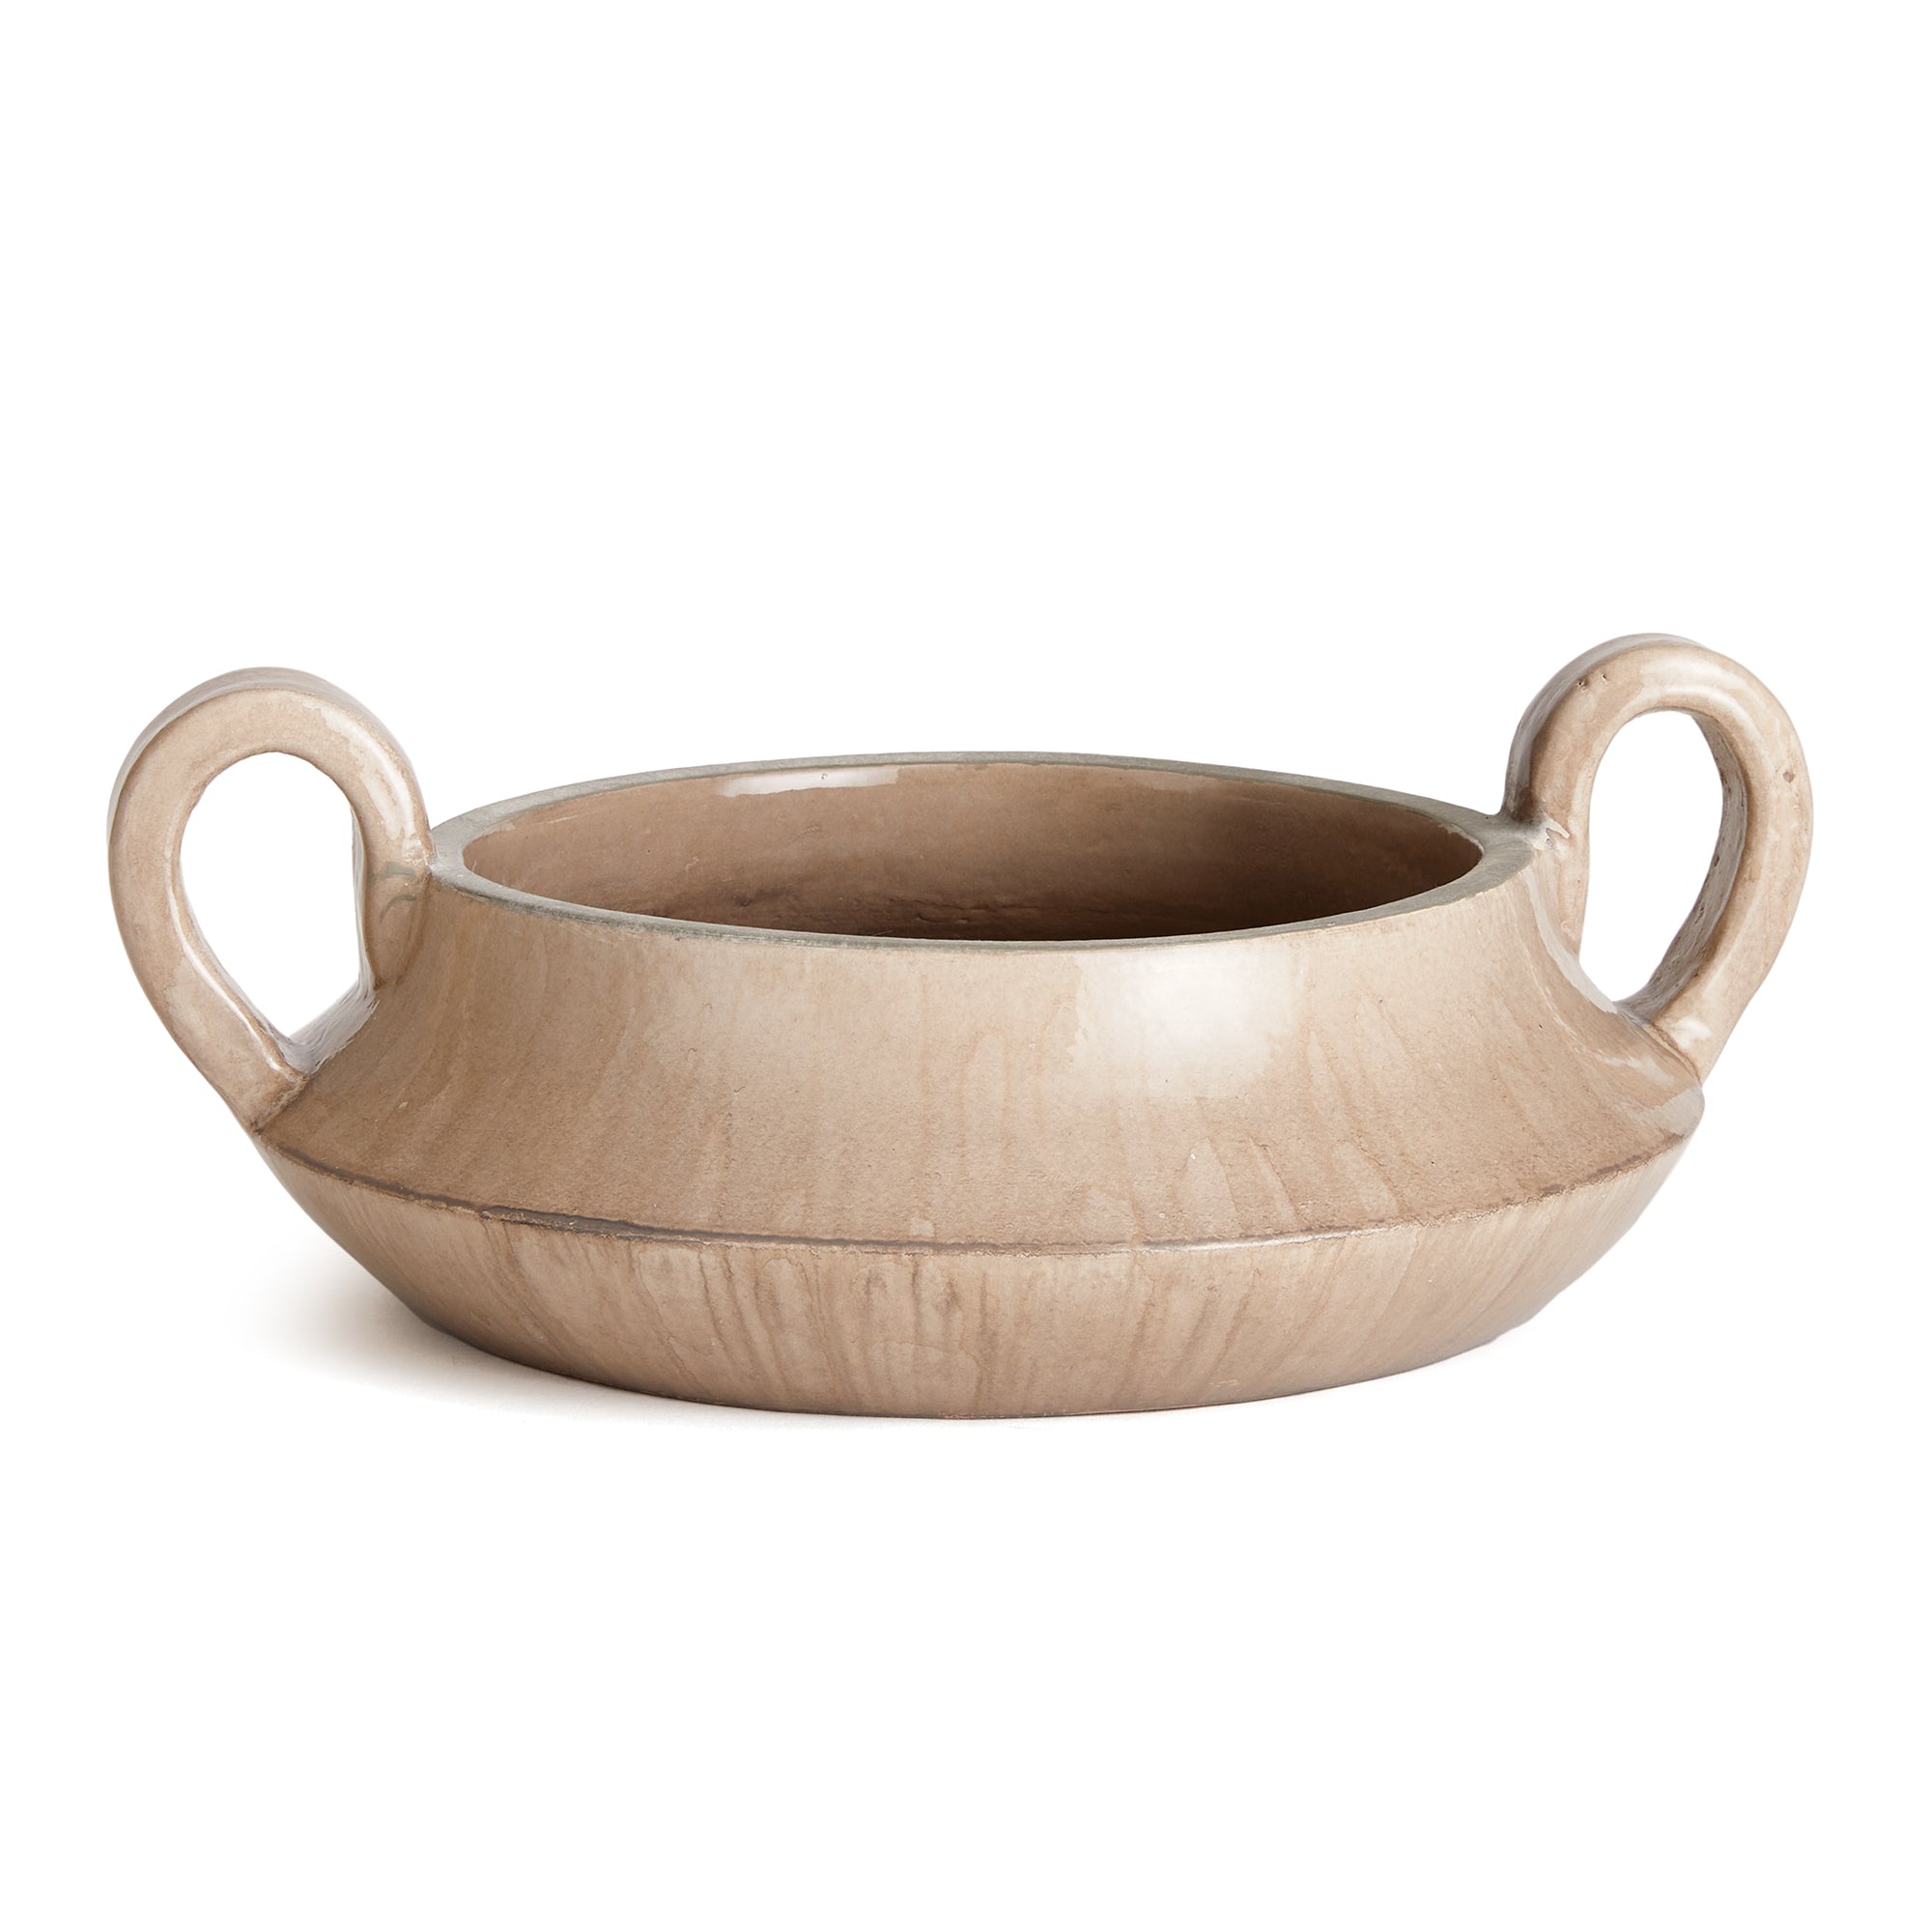 This vintage-inspired perfectly taupe bowl is not short on character and charm. From the unique shape, to the elevated loop handles and artistically uneven glaze, it makes a beautiful accent for kitchen or dining room. Amethyst Home provides interior design, new construction, custom furniture, and area rugs in the Miami metro area.